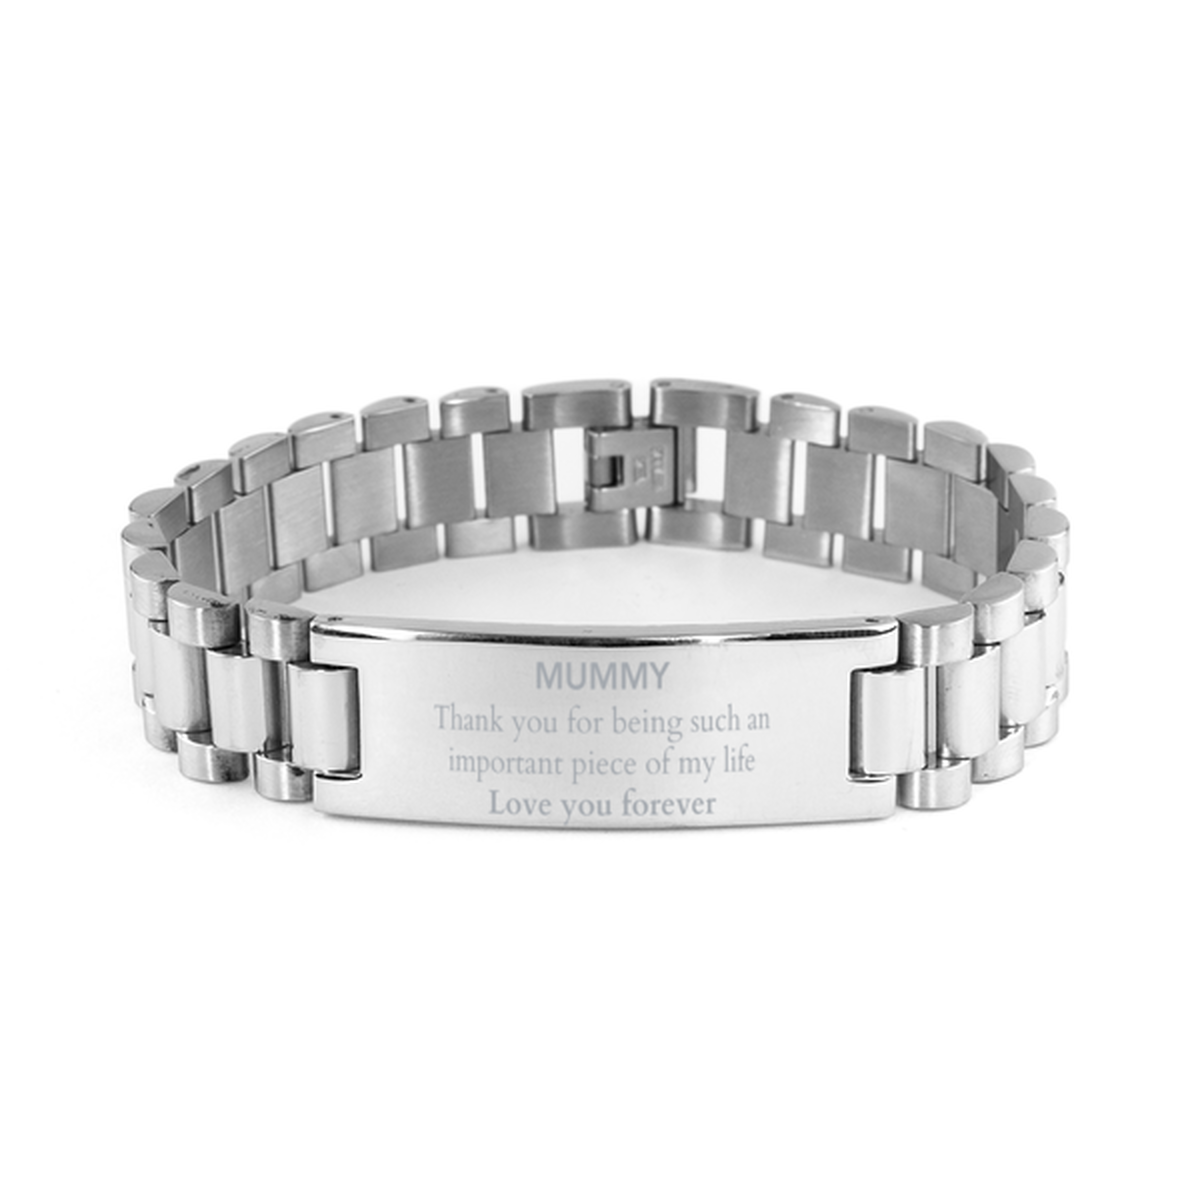 Appropriate Mummy Ladder Stainless Steel Bracelet Epic Birthday Gifts for Mummy Thank you for being such an important piece of my life Mummy Christmas Mothers Fathers Day